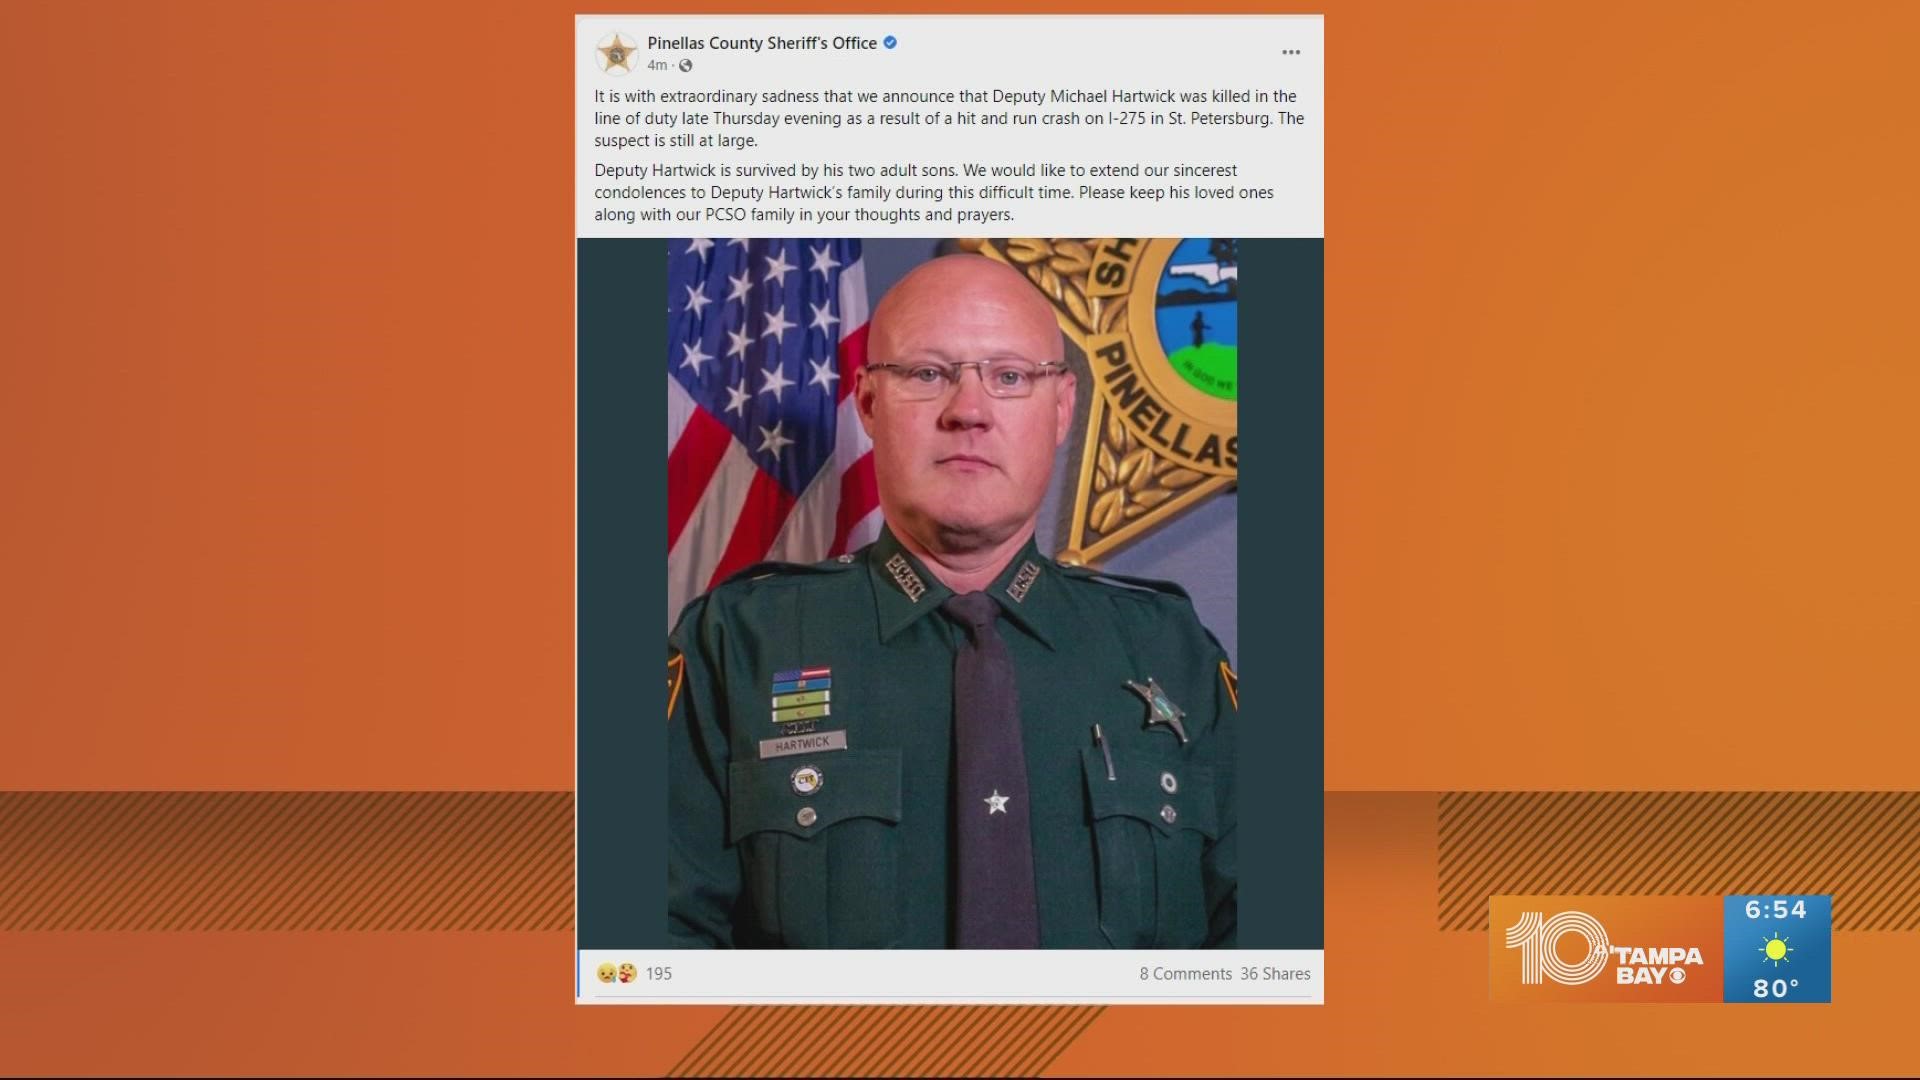 A Pinellas County Sheriff's Office deputy was killed in a deadly hit-and-run crash on I-275 in St. Petersburg.